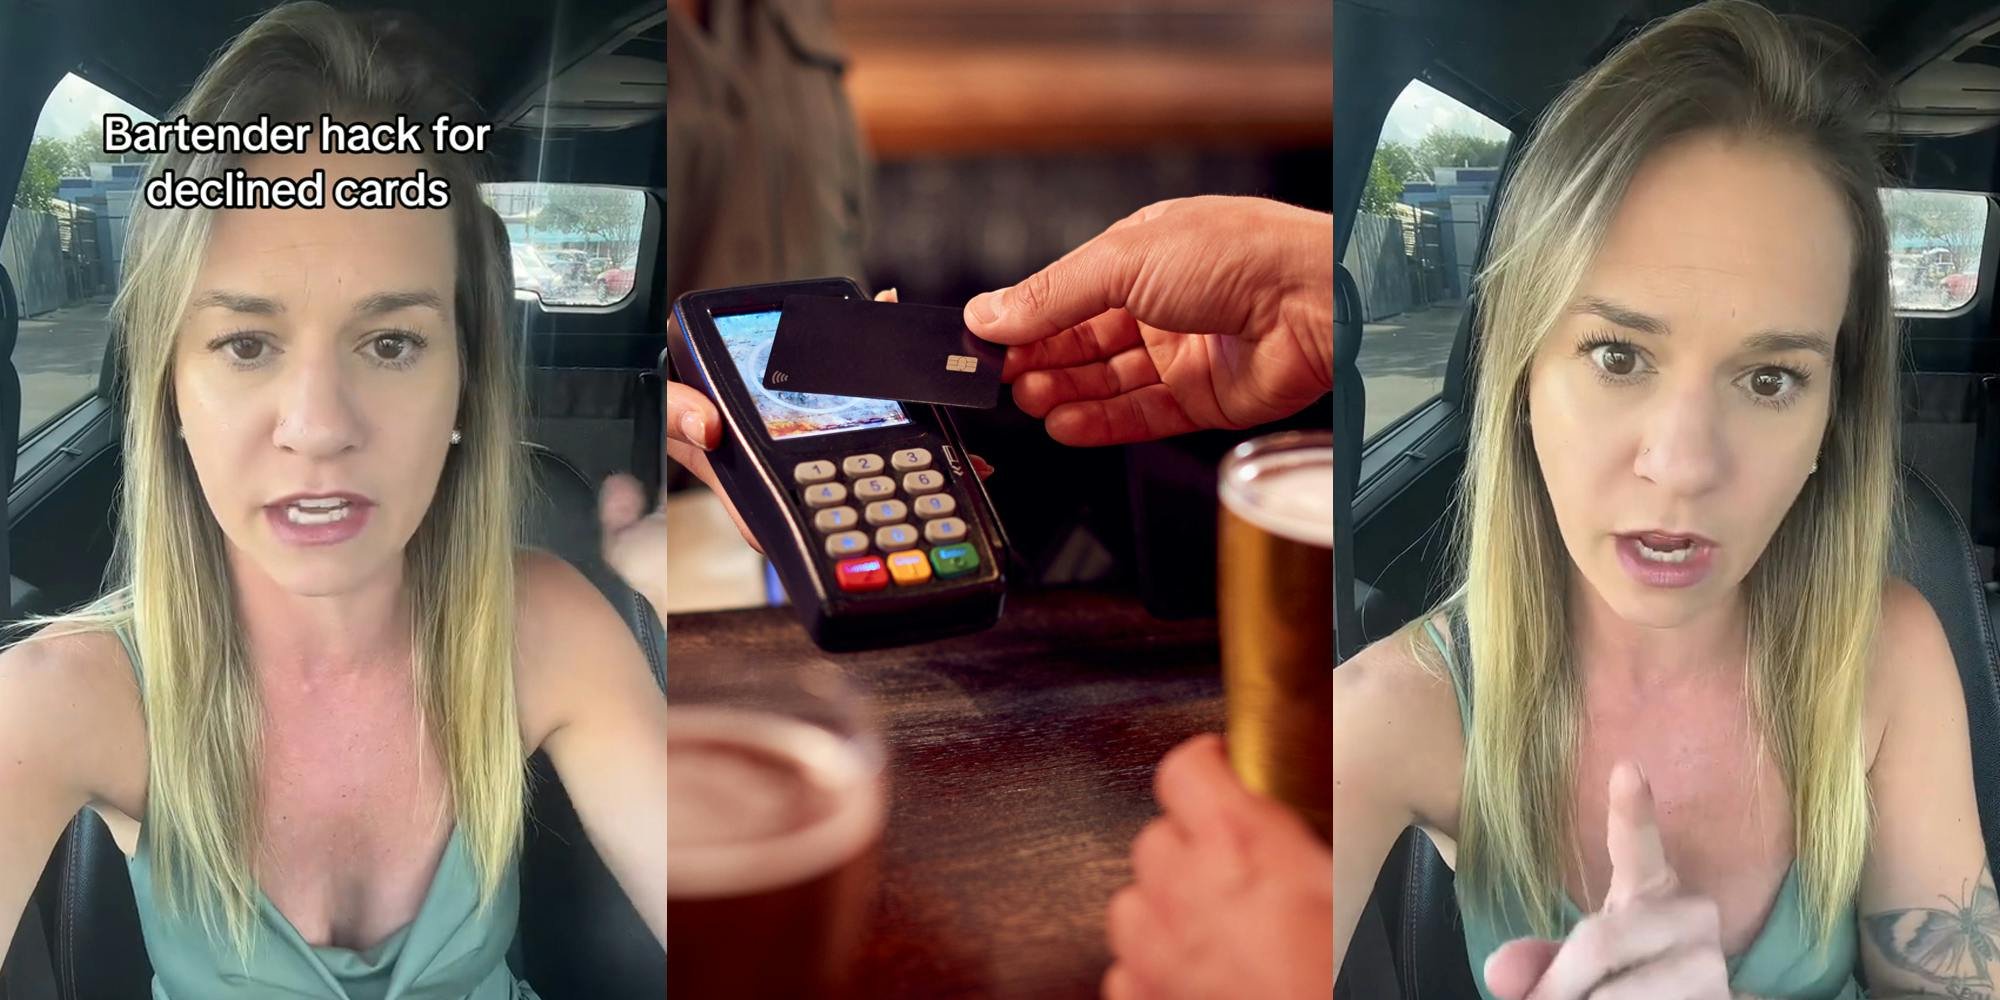 ‘They can easily dispute this’: Bartender shares hack for getting money from customers whose cards decline after they walk on tab